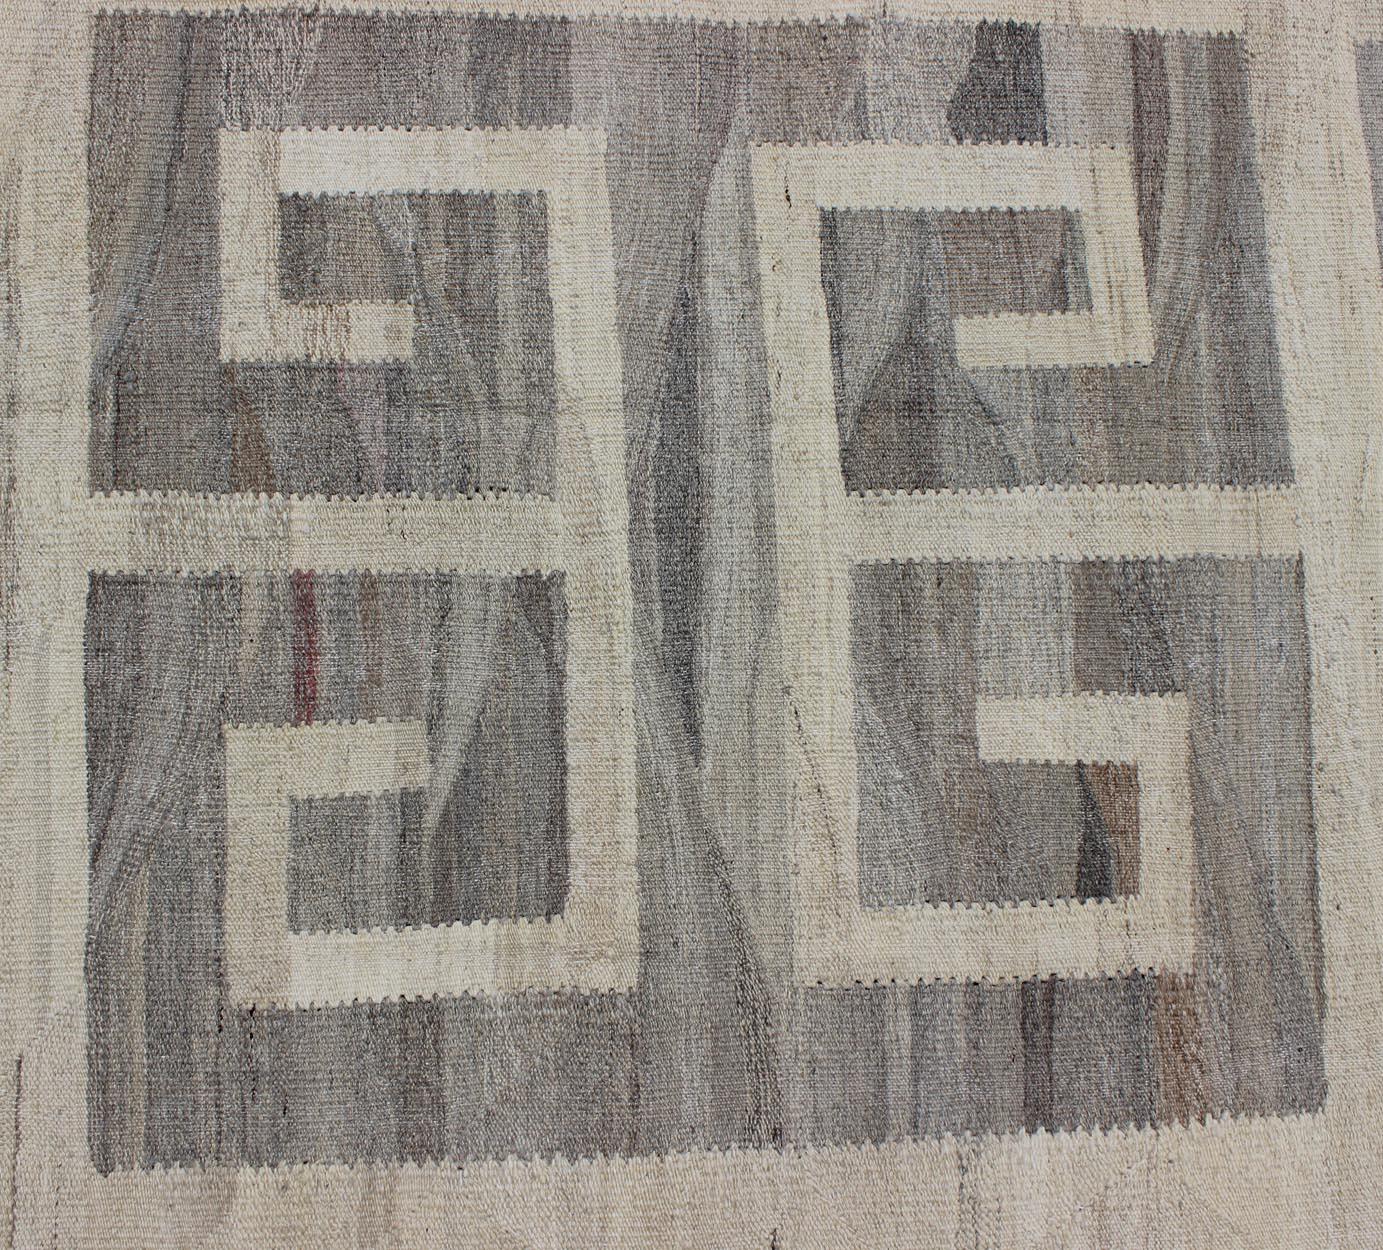 Oversized Modern Kilim with Large Scale Greek Key Design in Cream & Gray Tones For Sale 4